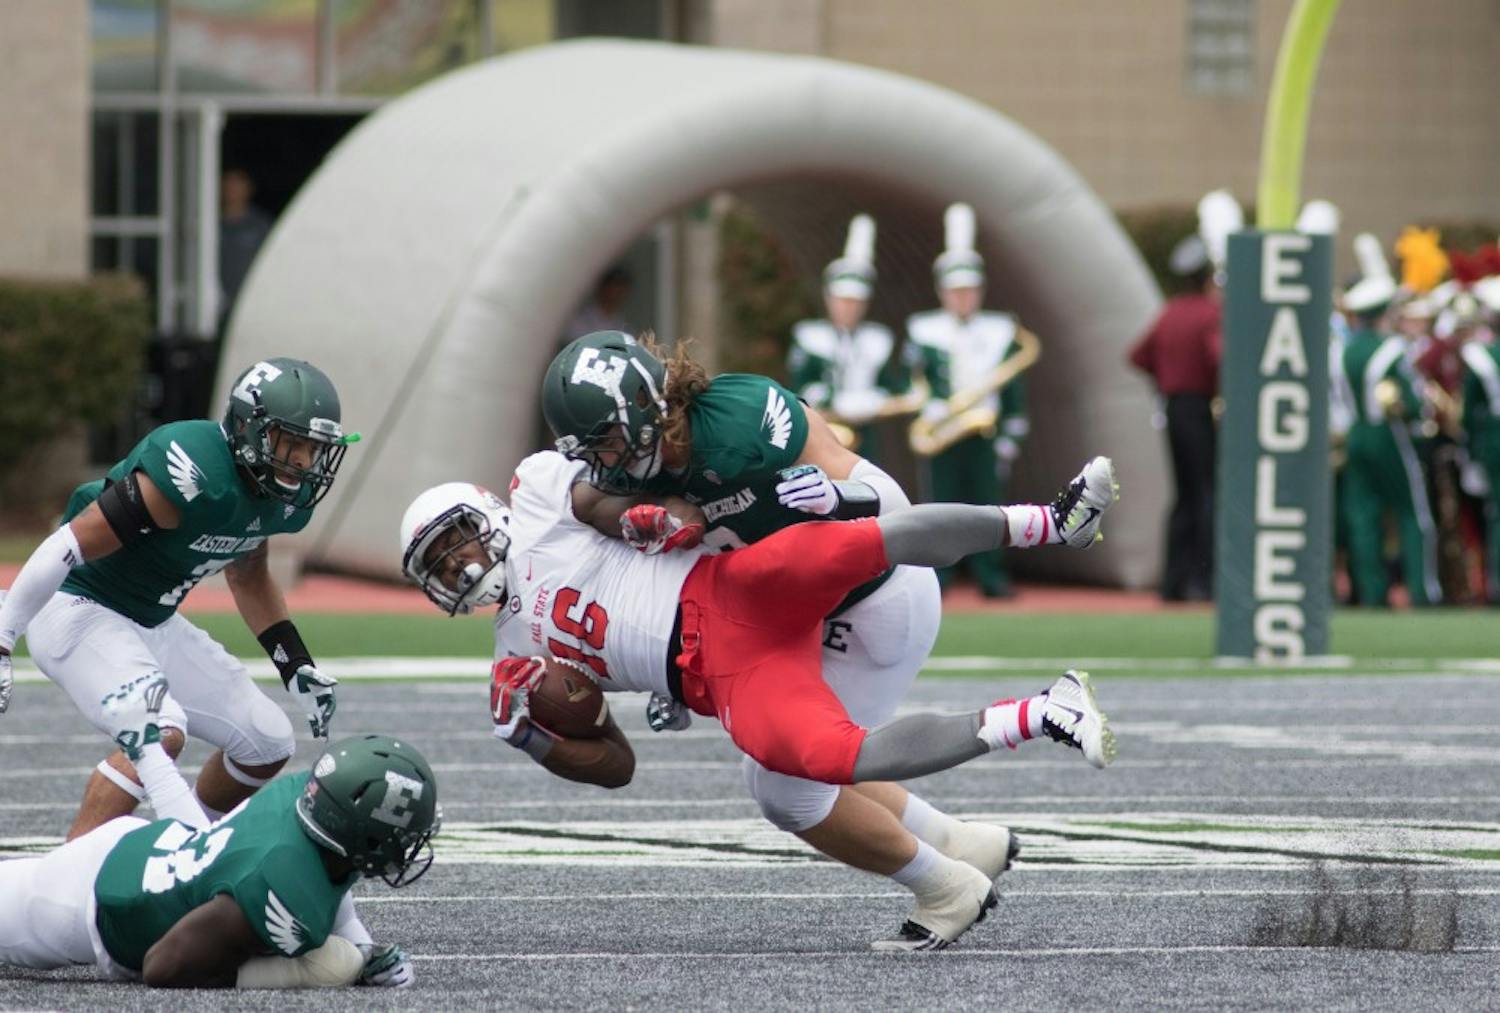 Eastern Michigan defensive lineman Luke MacLean lays down a hard hit on Ball State wide receiver Terin Solomon in the Eagles 28-17 loss to Ball State Saturday afternoon in Ypsilanti, Mich.